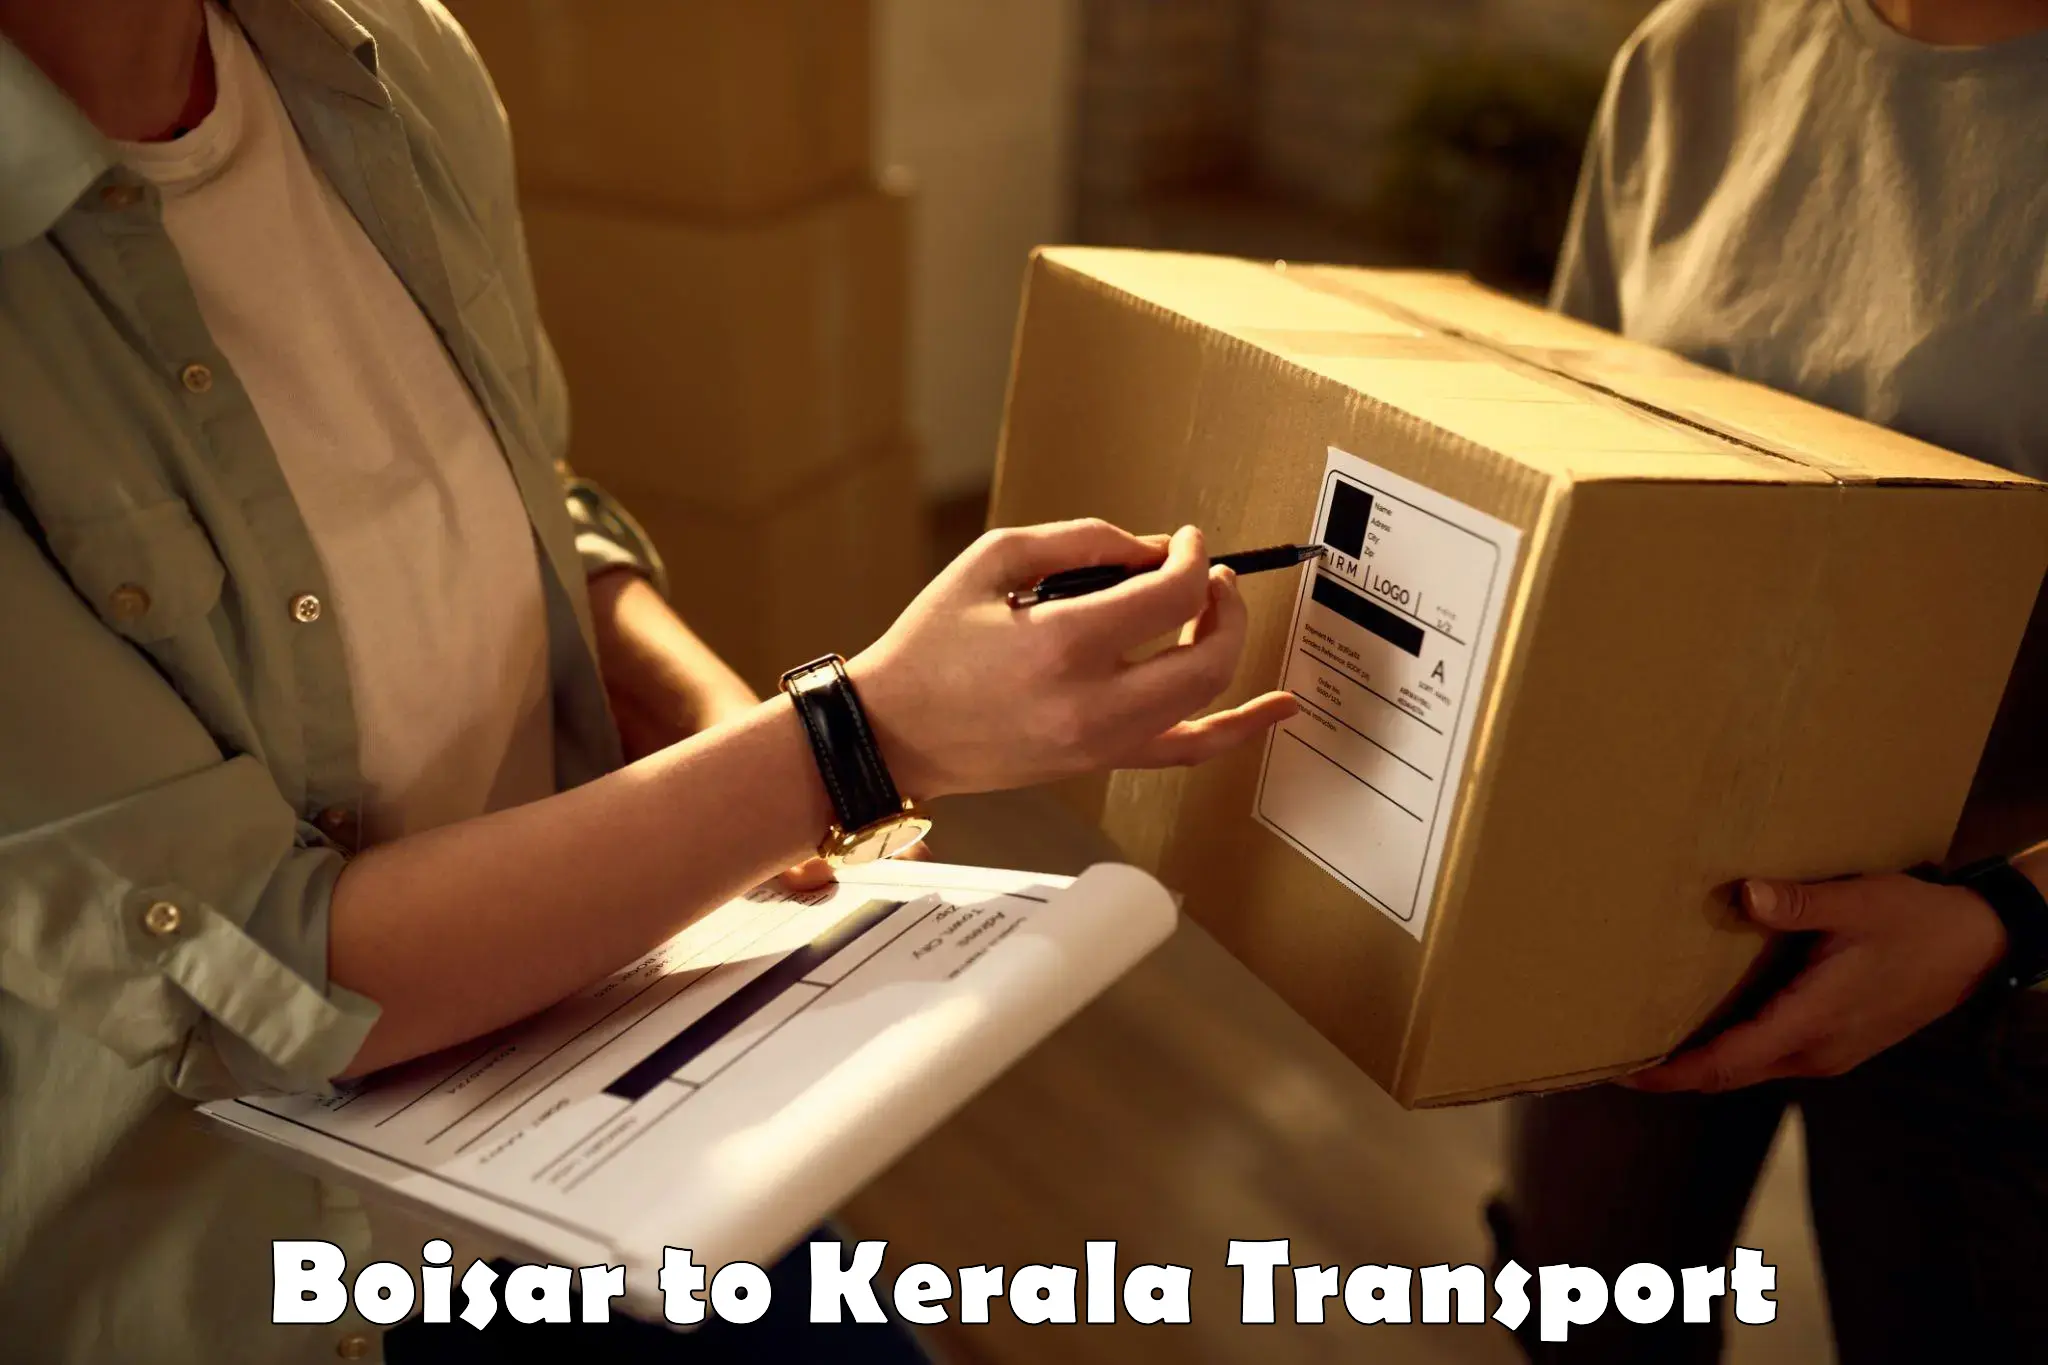 Air freight transport services Boisar to Ernakulam